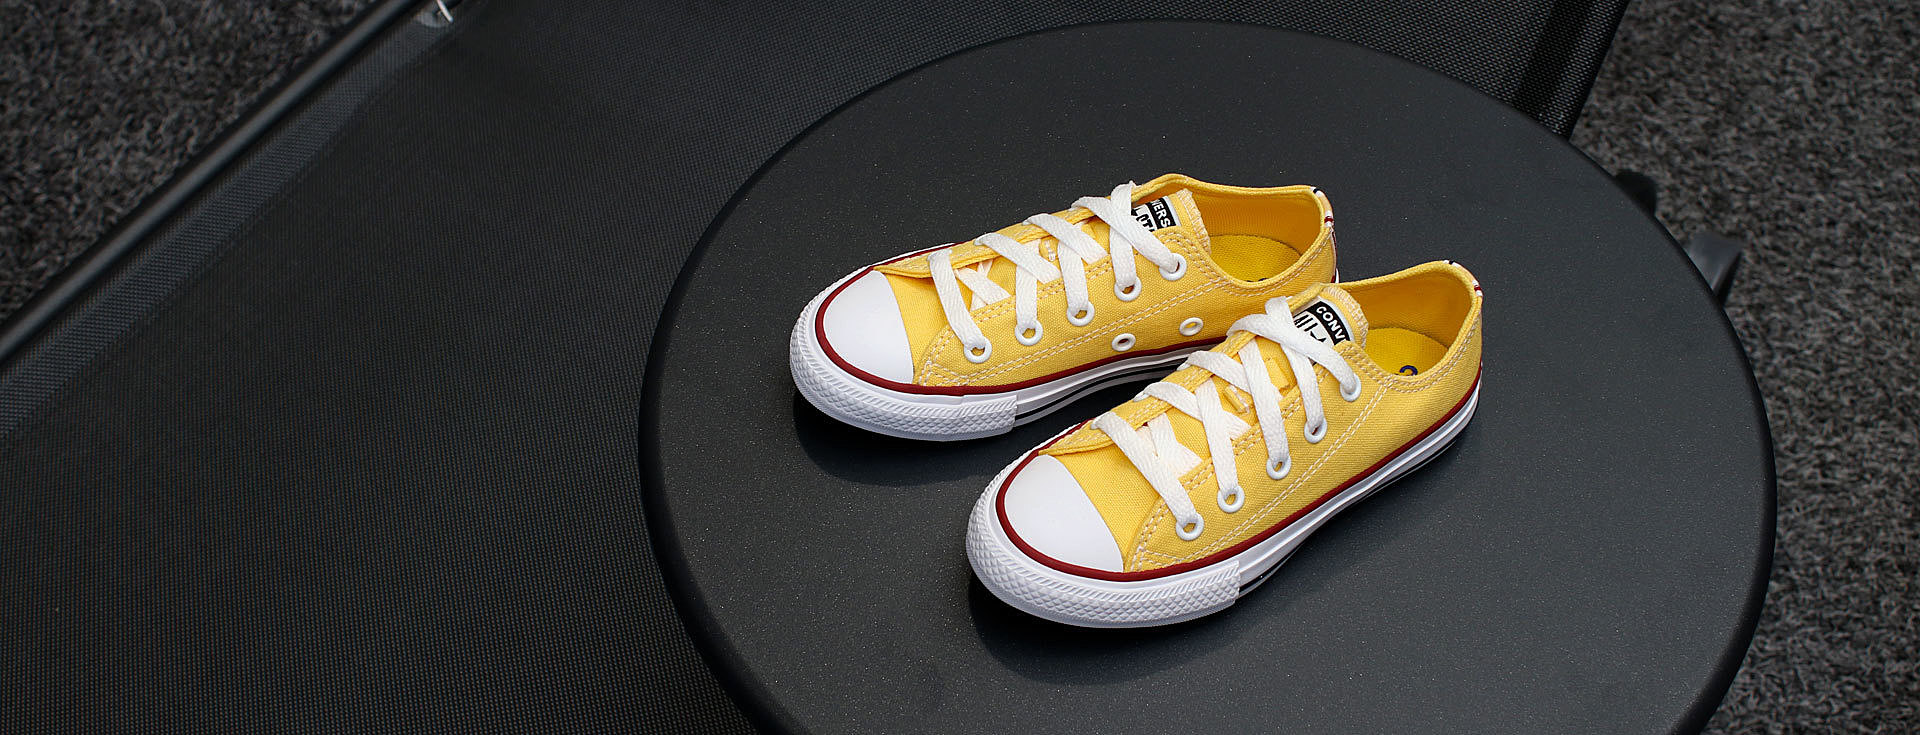 soulier converse magasin